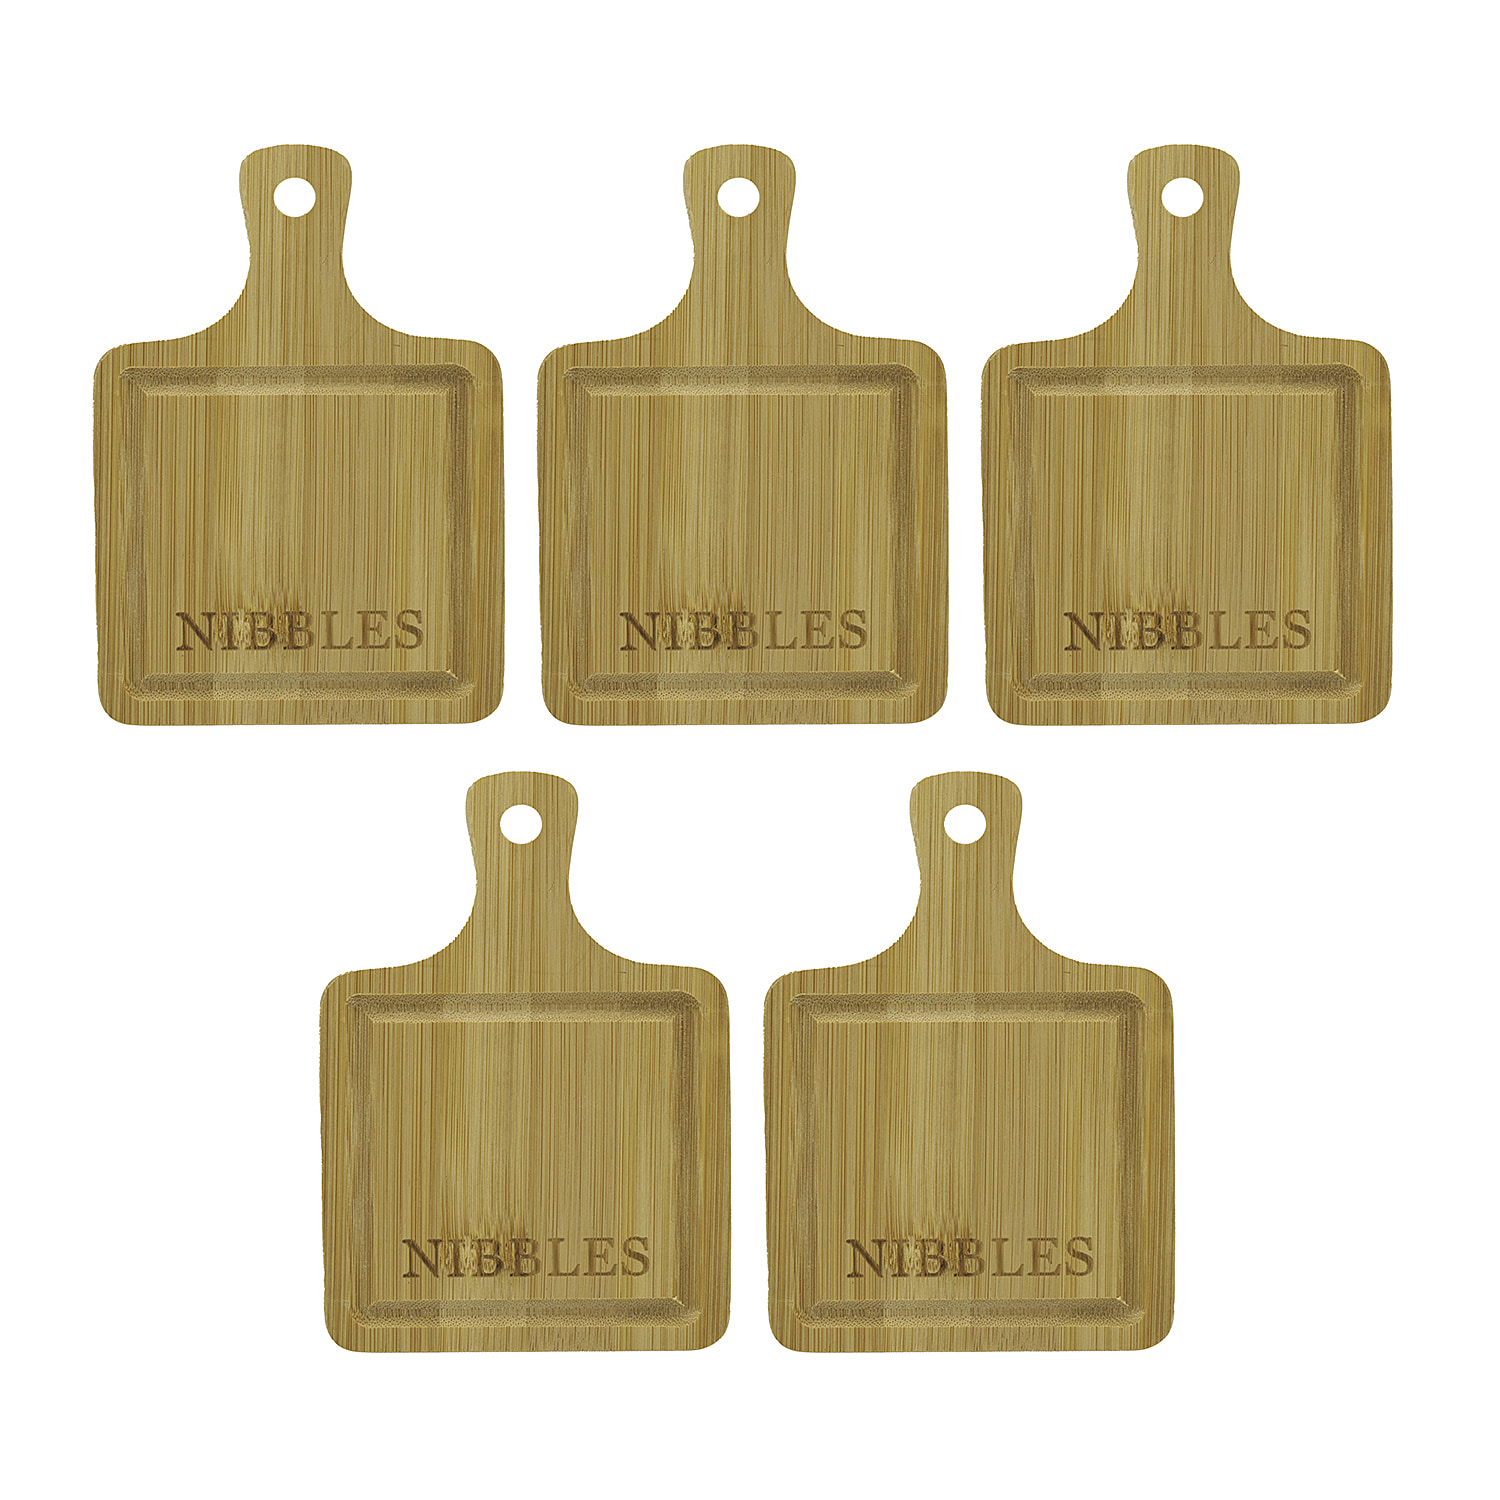 Kitchenware-and-Tableware-Sample-Size-1x1x1-cm-Wood